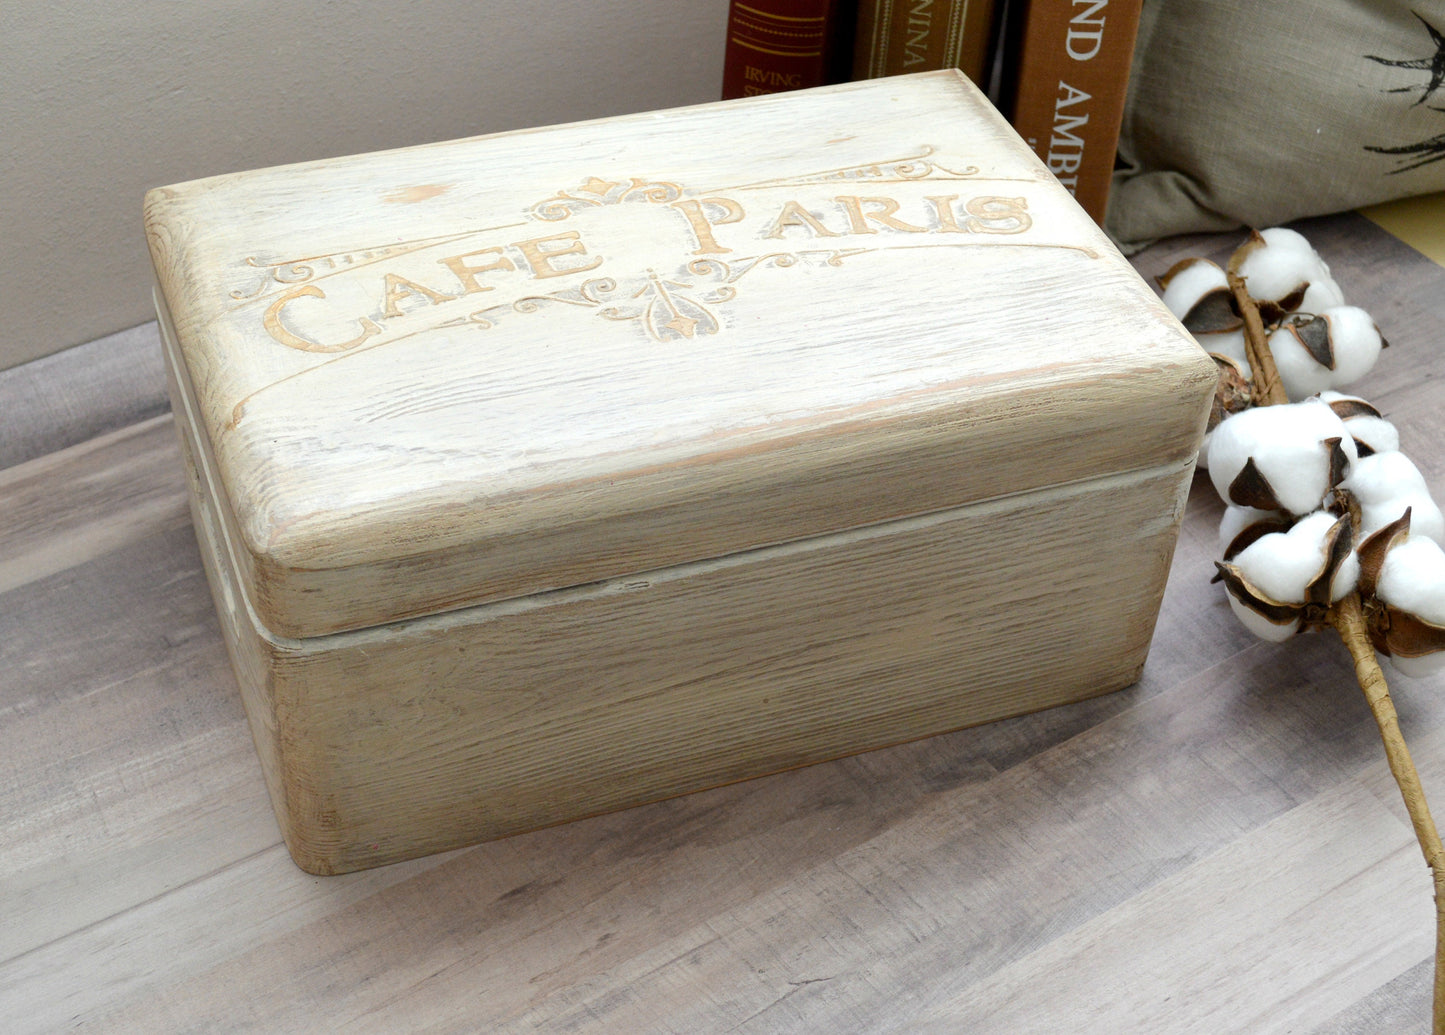 Large Rustic Wooden Box Treasure Chest, Cafe Paris Old White Storage Case Colonial Photo box Gift for her Memory Capsule Gift Home decor box